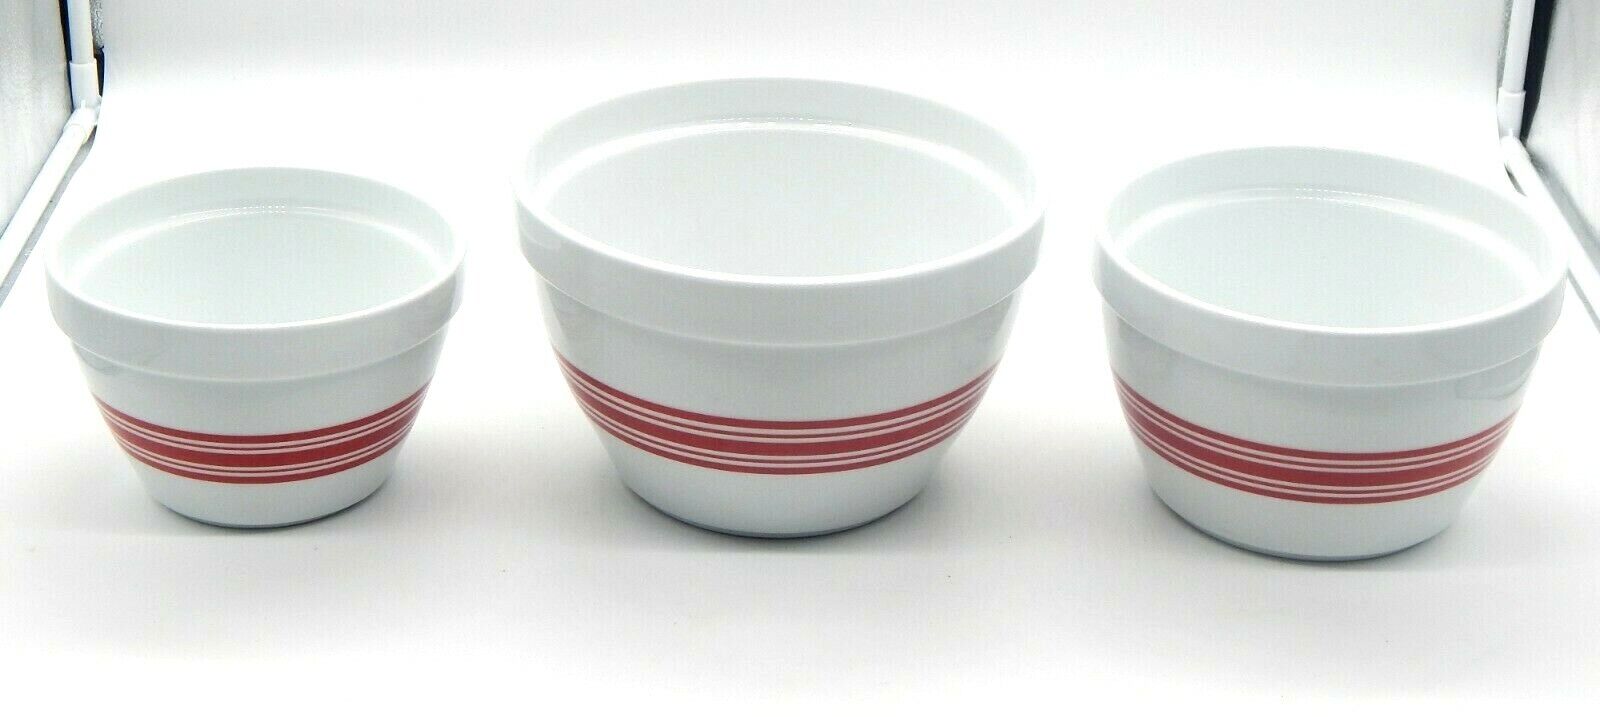 Crate and Barrel Set of (3) Nesting Red Stripe Ceramic Mixing 7", 8", 9.5" Bowls Crate & Barrel N/A